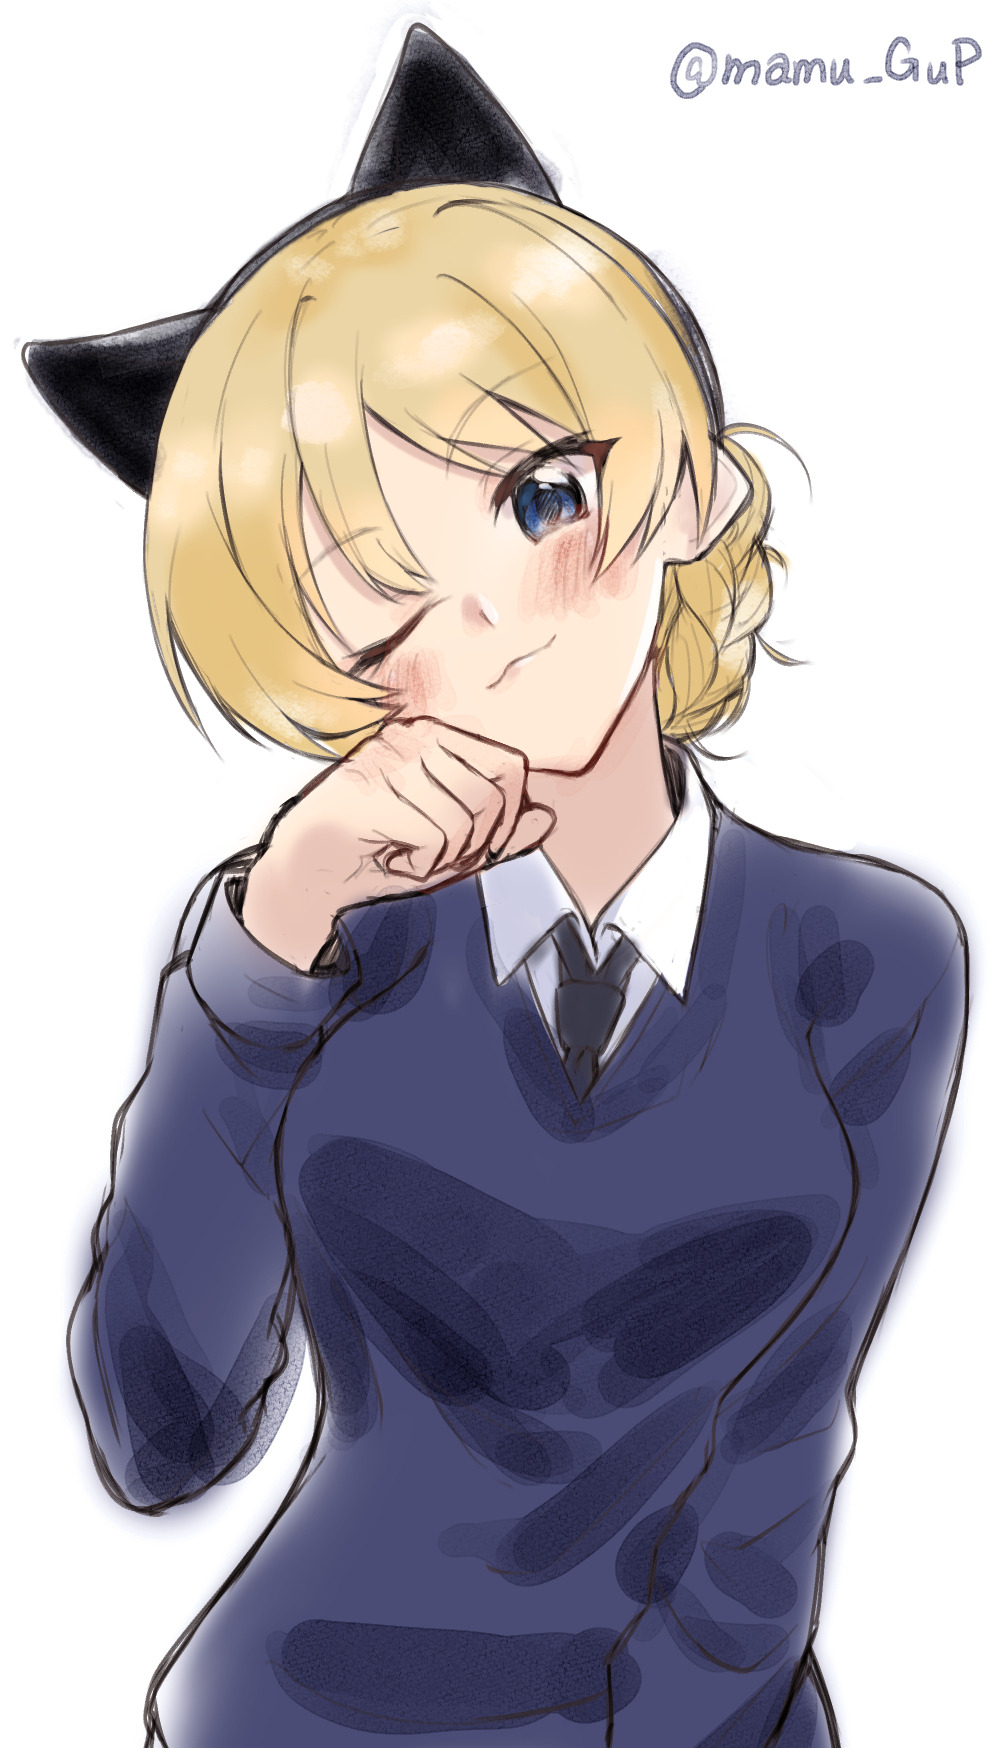 1girl :3 animal_ears bangs black_neckwear blonde_hair blue_eyes blue_sweater braid cat_ears closed_mouth commentary darjeeling dress_shirt eyebrows_visible_through_hair fake_animal_ears girls_und_panzer head_tilt highres long_sleeves looking_at_viewer mamu_t7s necktie one_eye_closed paw_pose school_uniform shirt short_hair simple_background smile solo st._gloriana's_school_uniform sweater tied_hair twitter_username upper_body v-neck white_background white_shirt wing_collar